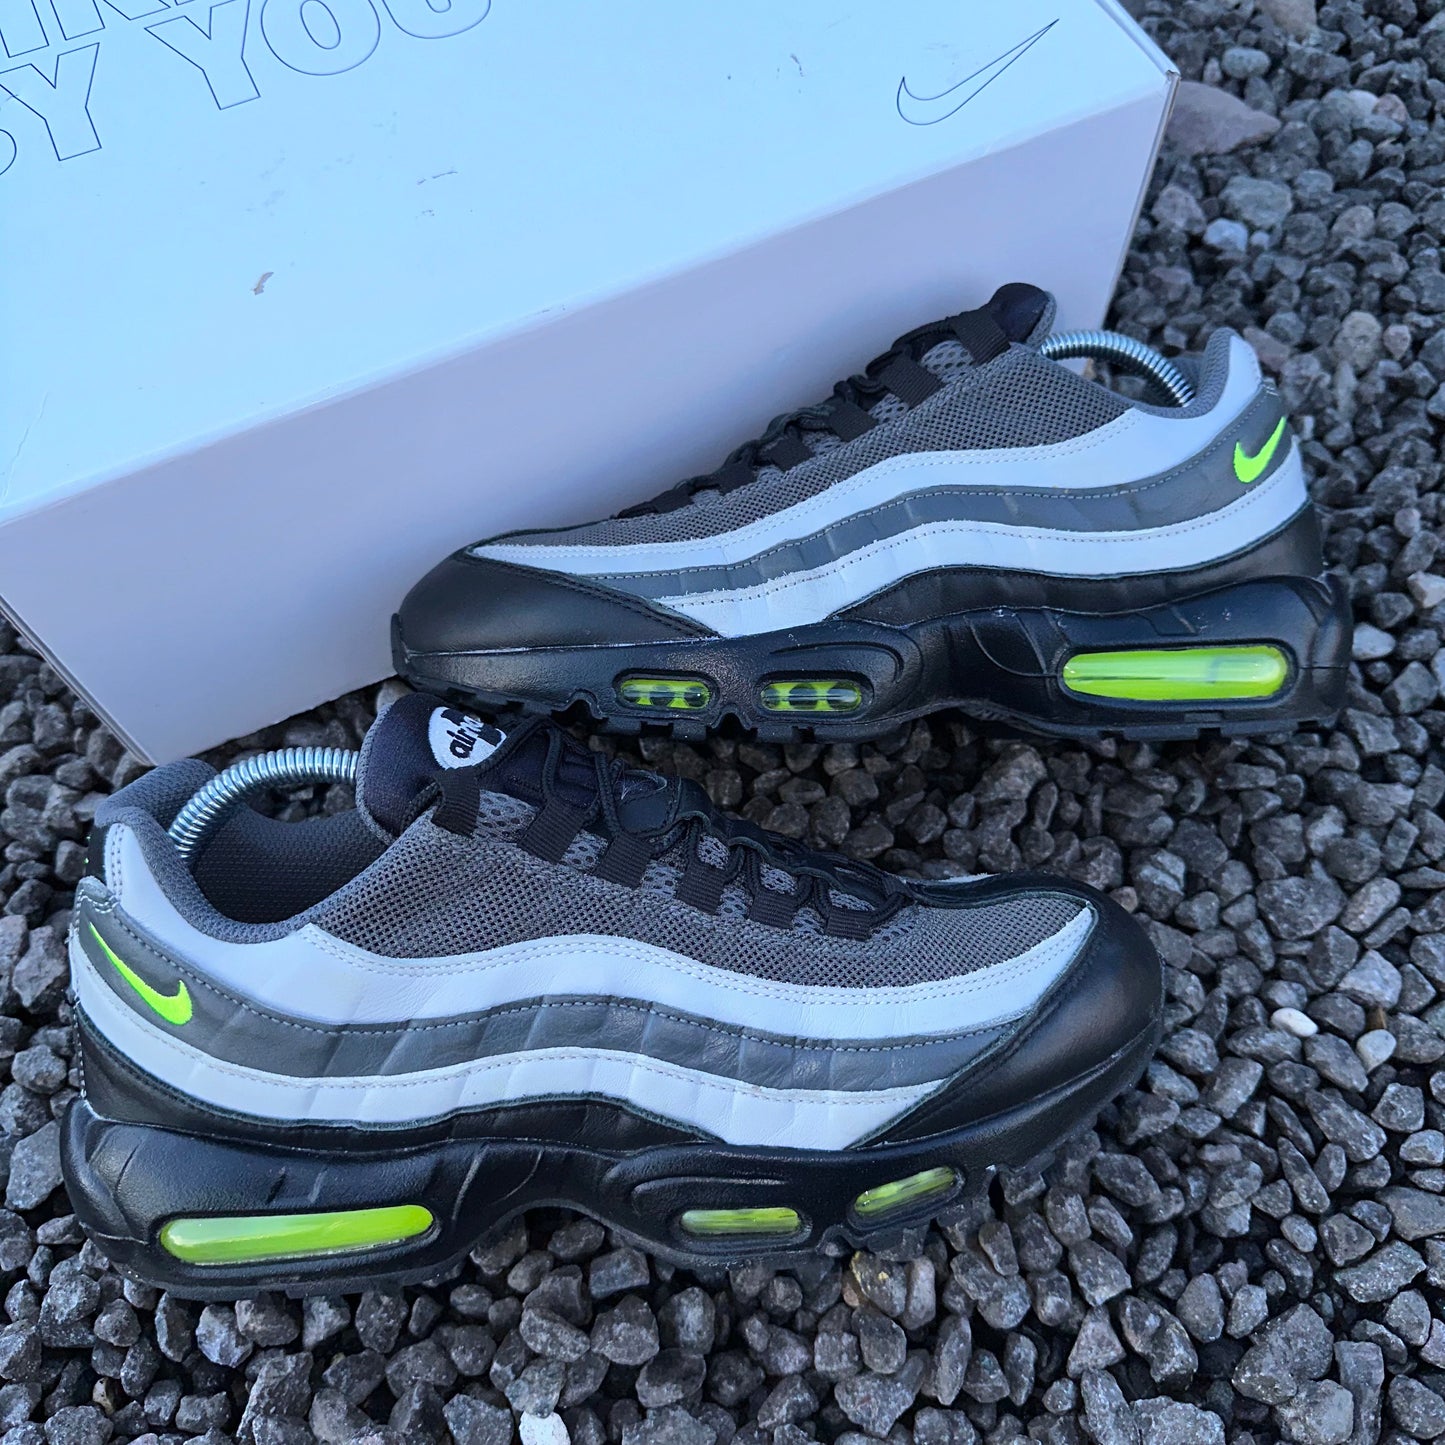 Used Air Max 95 By You Leather Black/Neon/Grey (2020)